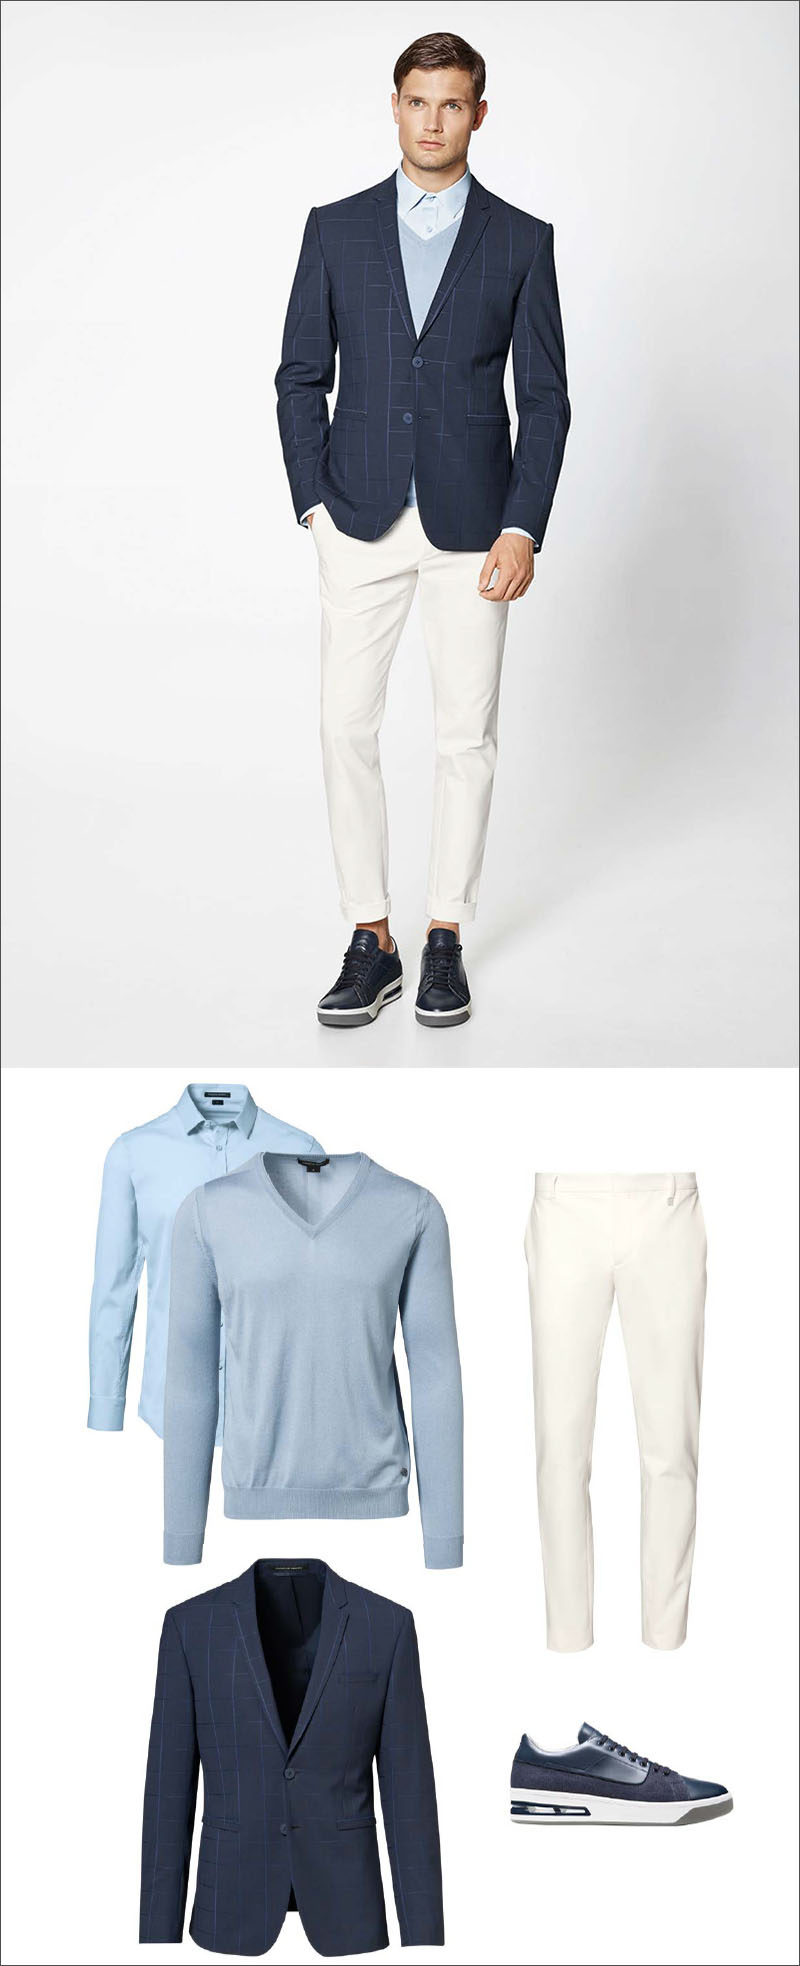 Men's Fashion Ideas - 17 Men's Outfits From Porsche Design's 2017 Spring/Summer Collection | A collared blue shirt layered under a light blue v-neck sweater and worn with a navy blazer, white cotton pants, and a pair of navy blue sneakers create a sophisticated looking men's outfit.